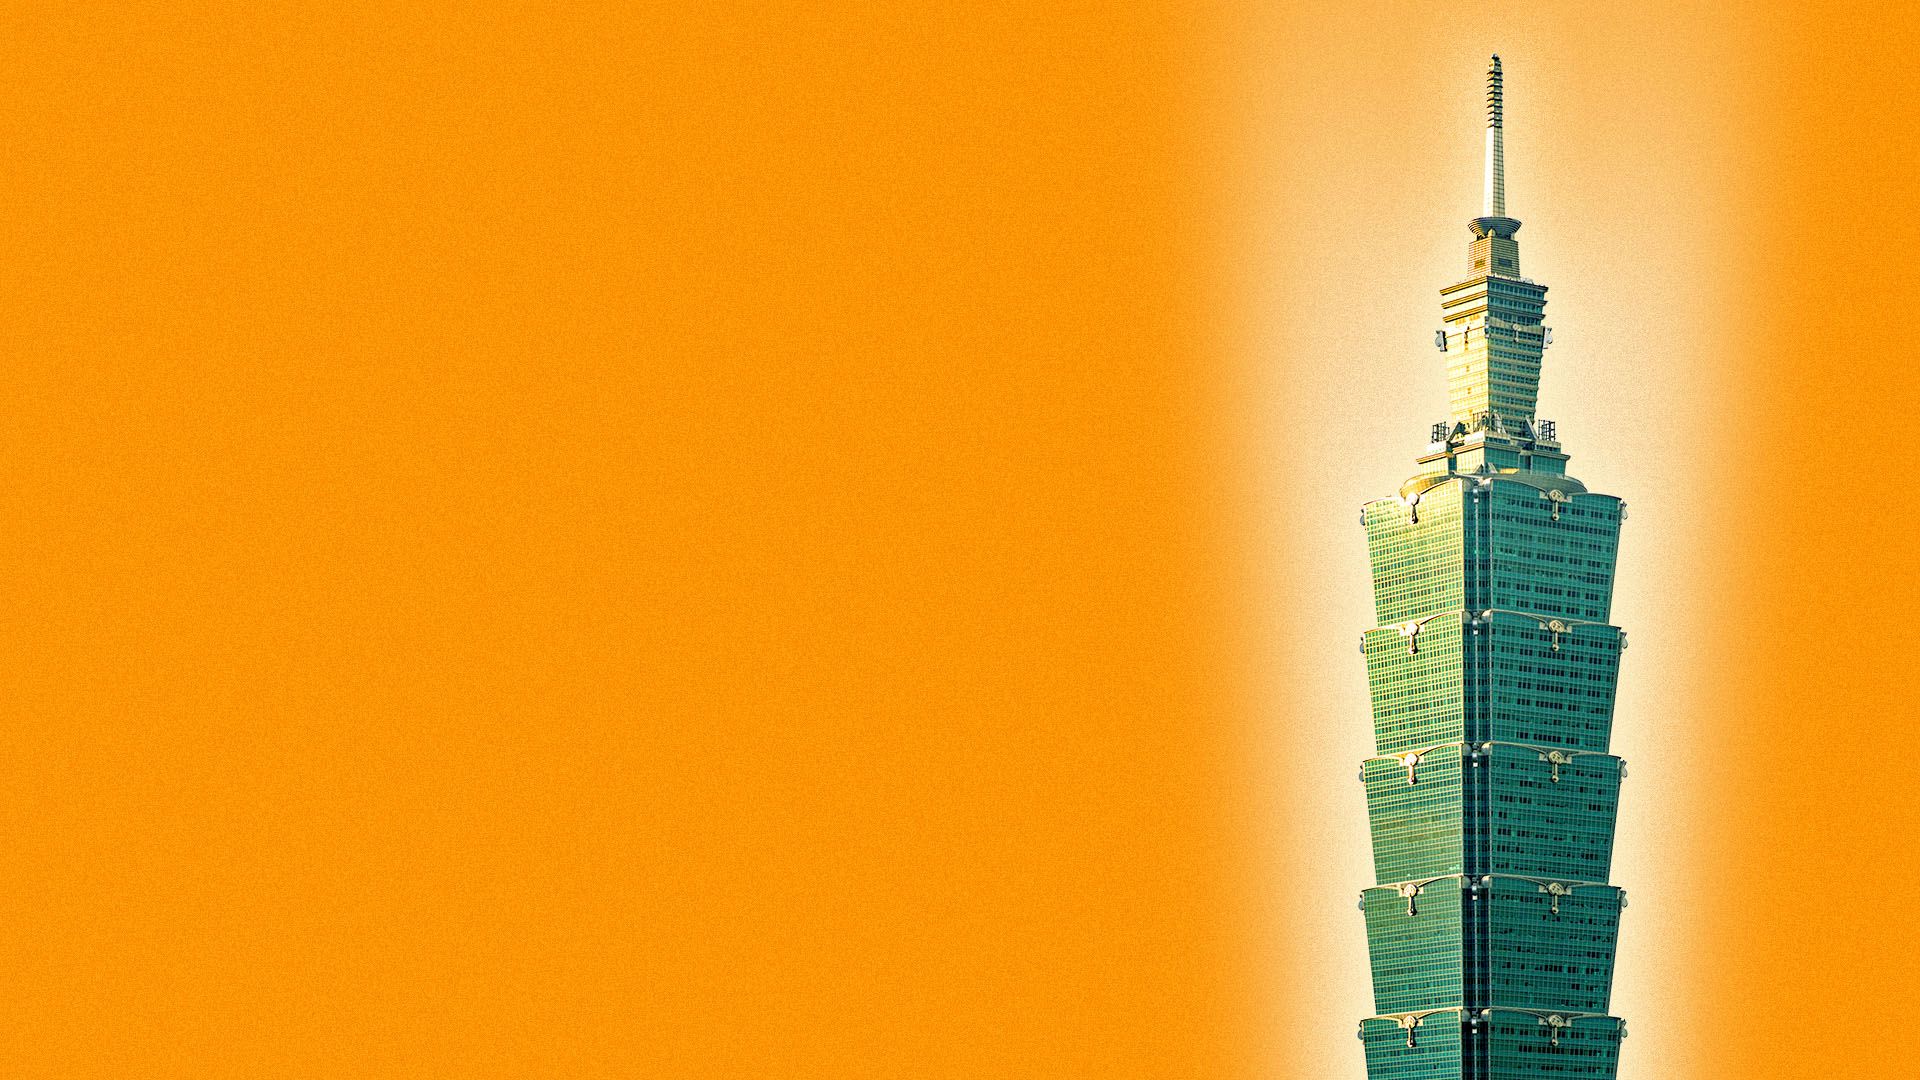 Illustration of a glowing Taipei 101 building in Taiwan